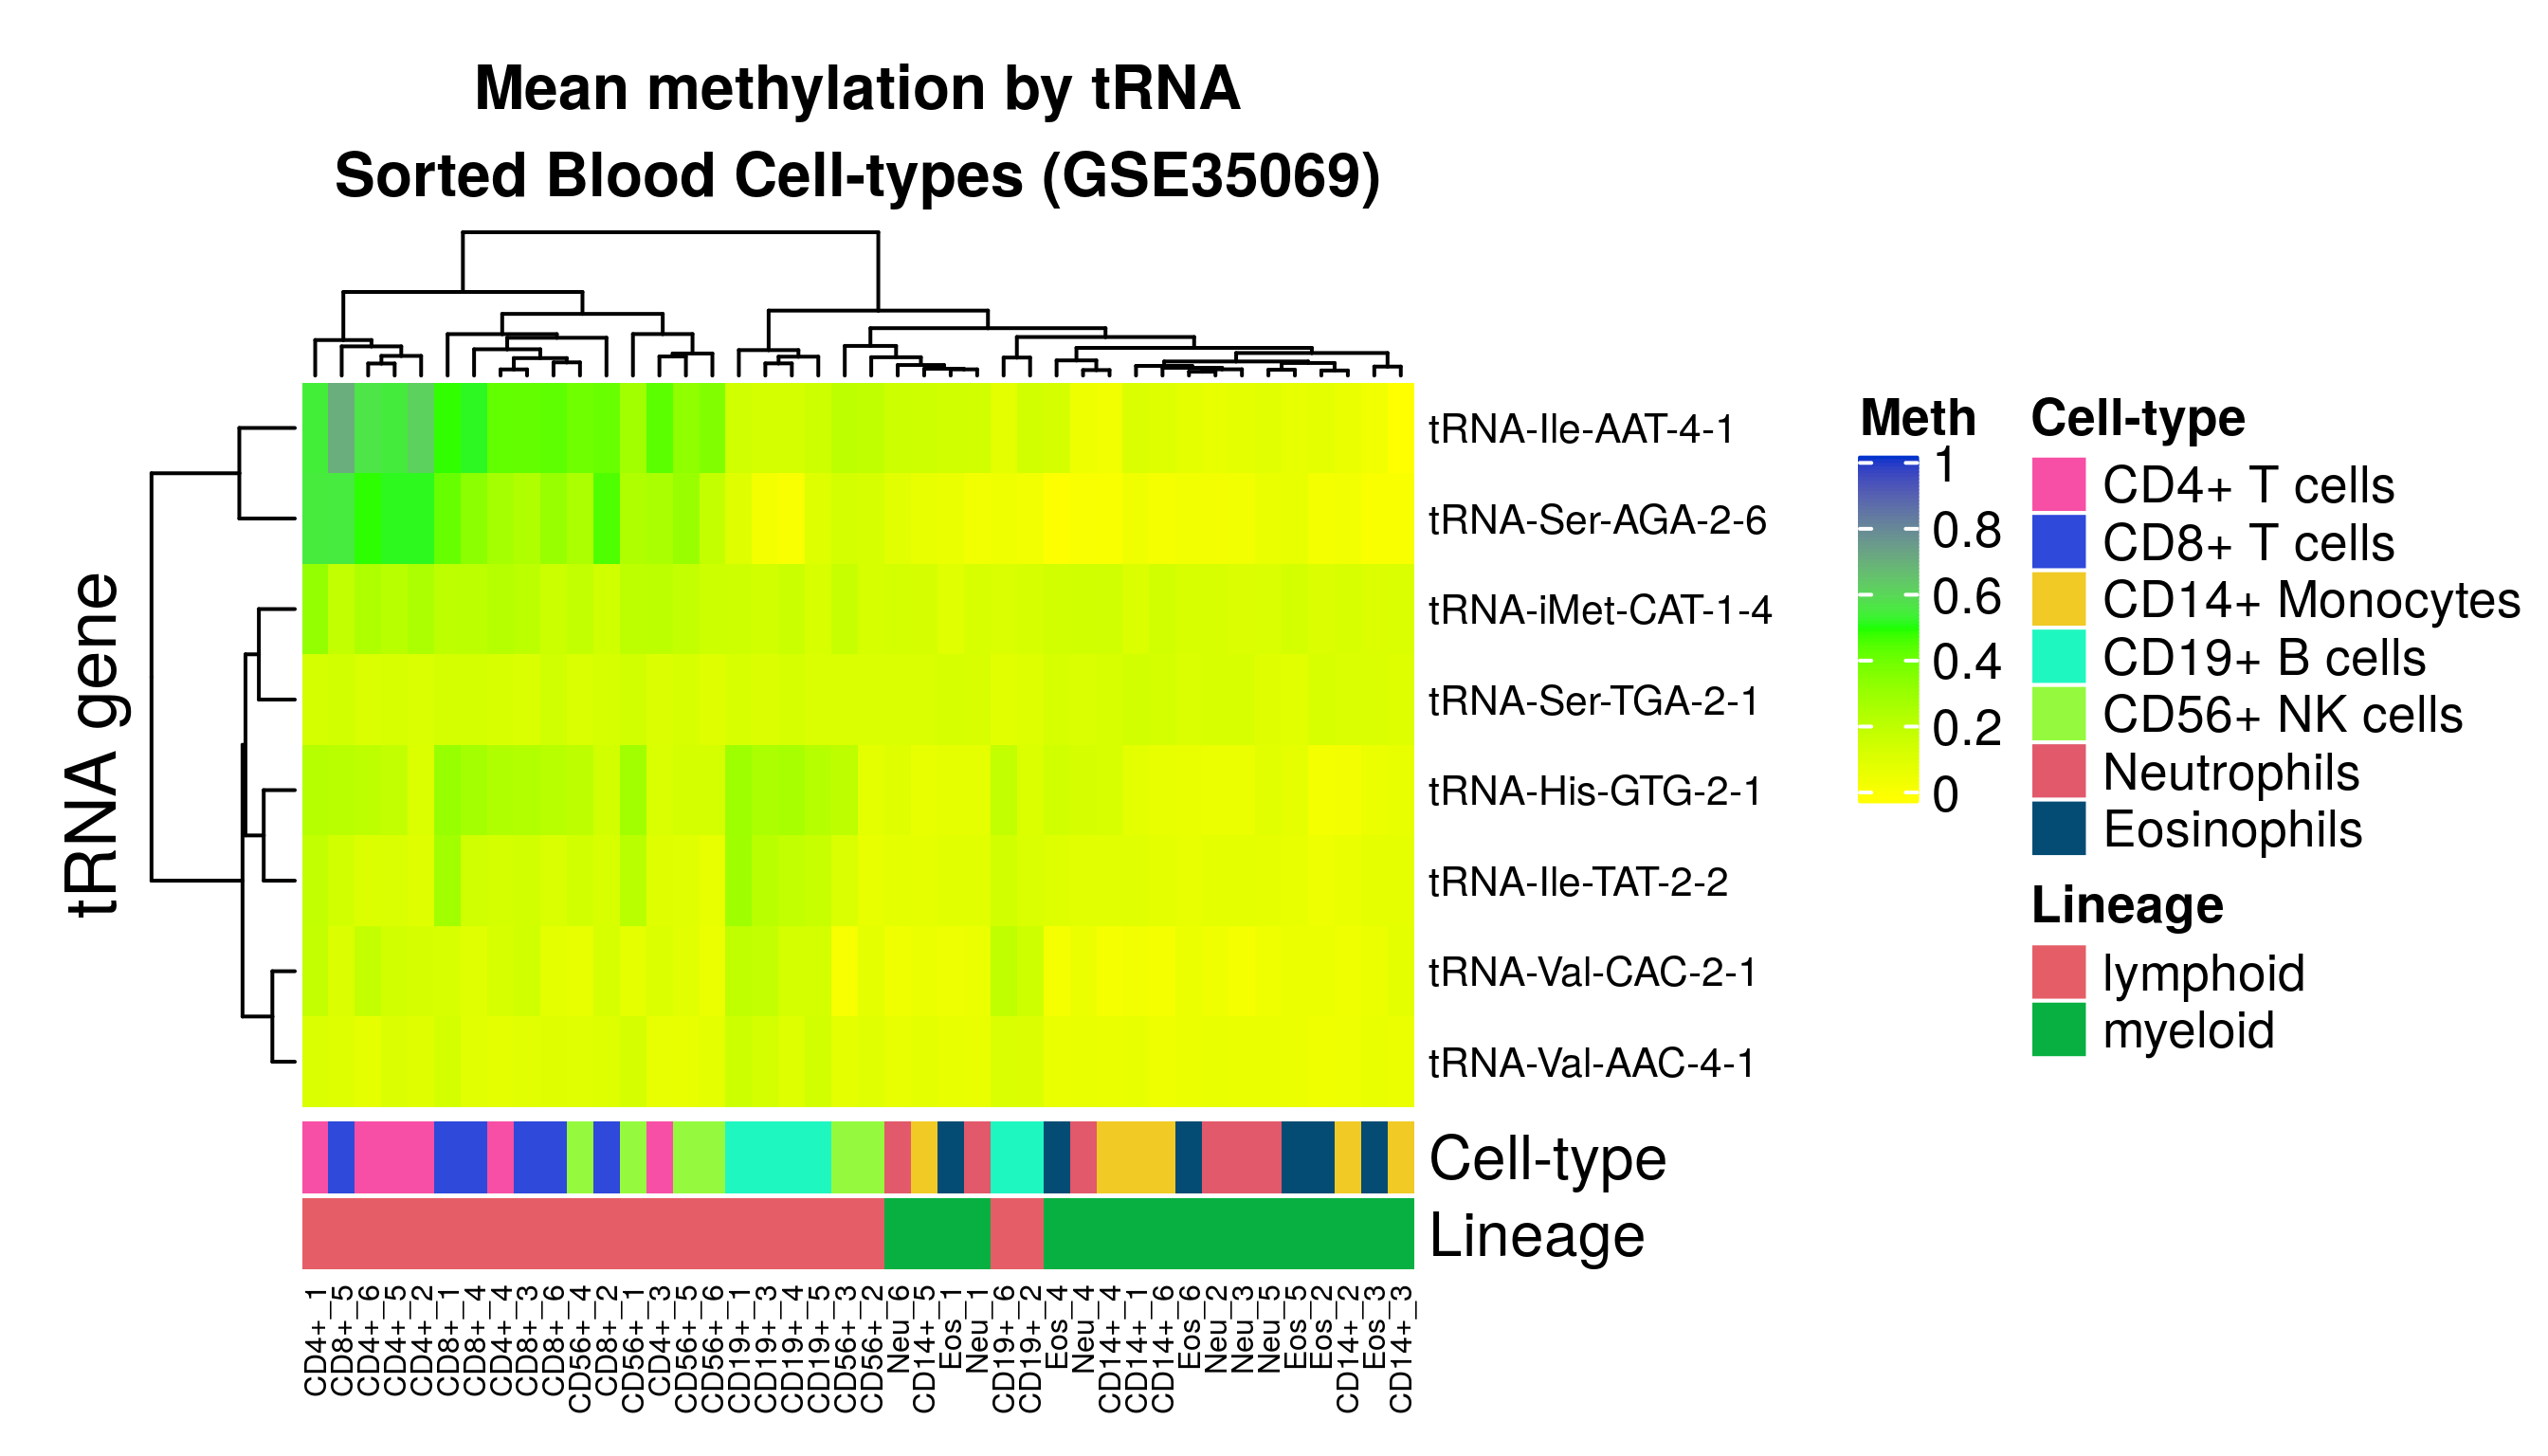 Heatmap [379] of mean methylation of probes covering each tRNA in 7 cell-type fractions from 6 Male individuals. Data from GSE35069 [369]. Of the 16 study-wide significant hypermethylating tRNAs, 8 are covered by this dataset.